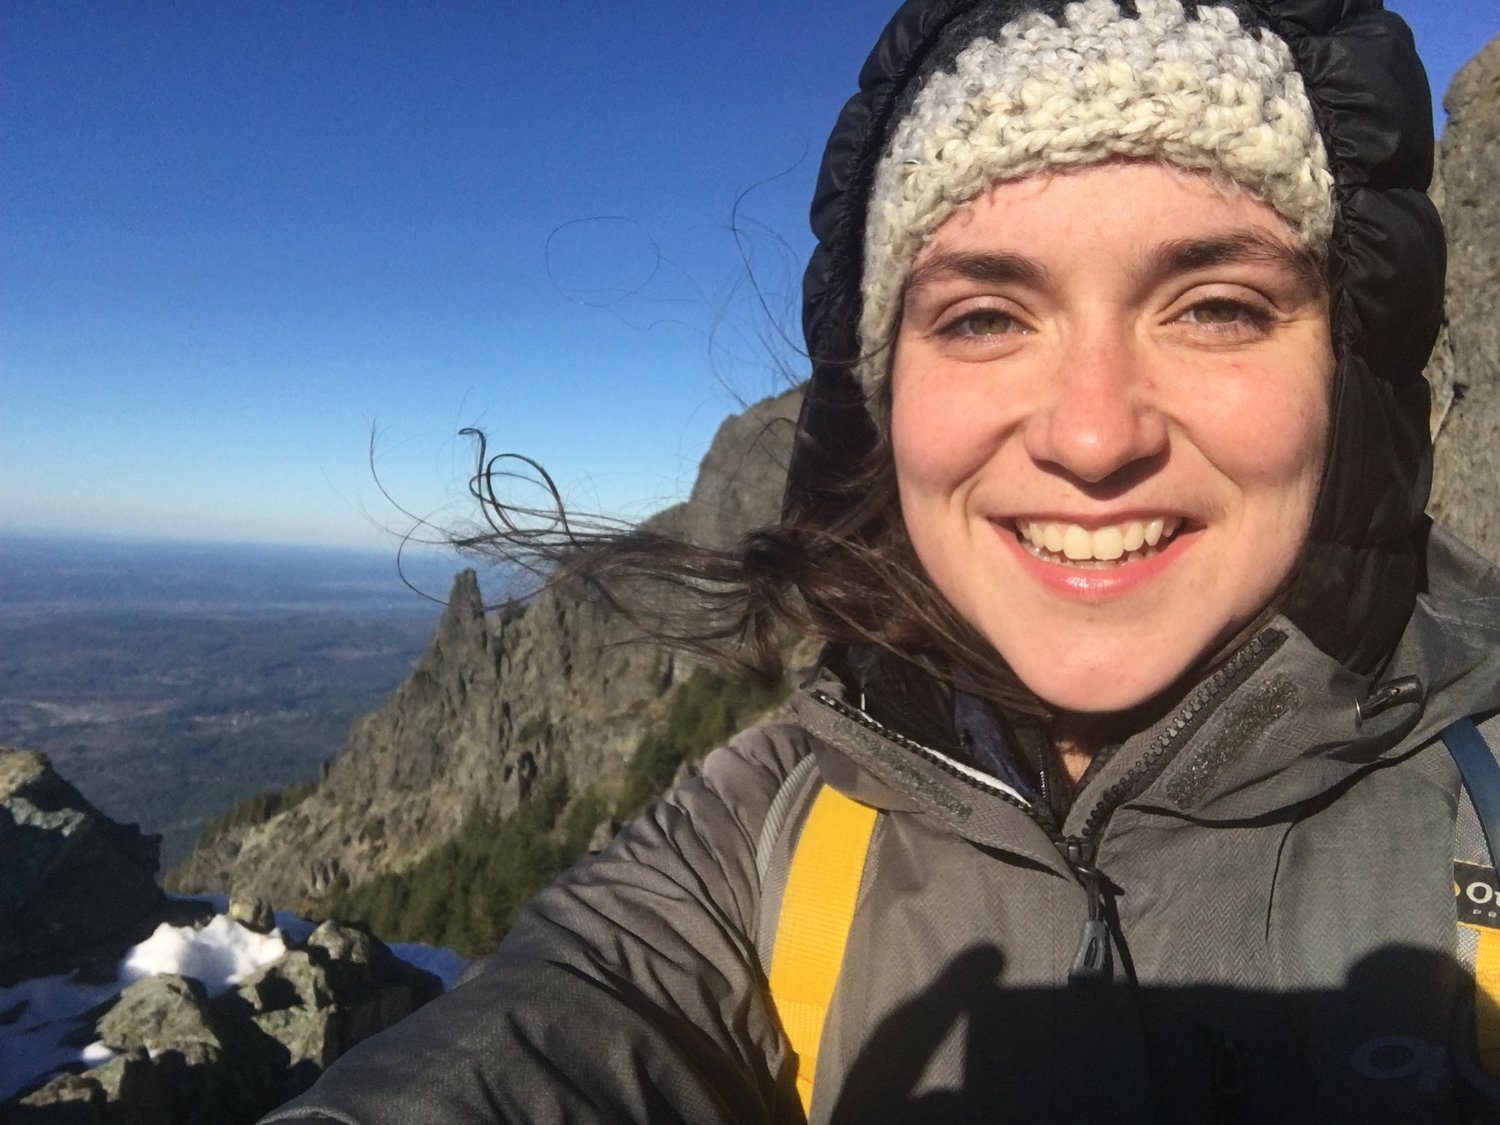 Haley Springston, watershed planning coordinator for the Rondout Neversink Stream program, will led a discussion about glaciers' effect on the local region.